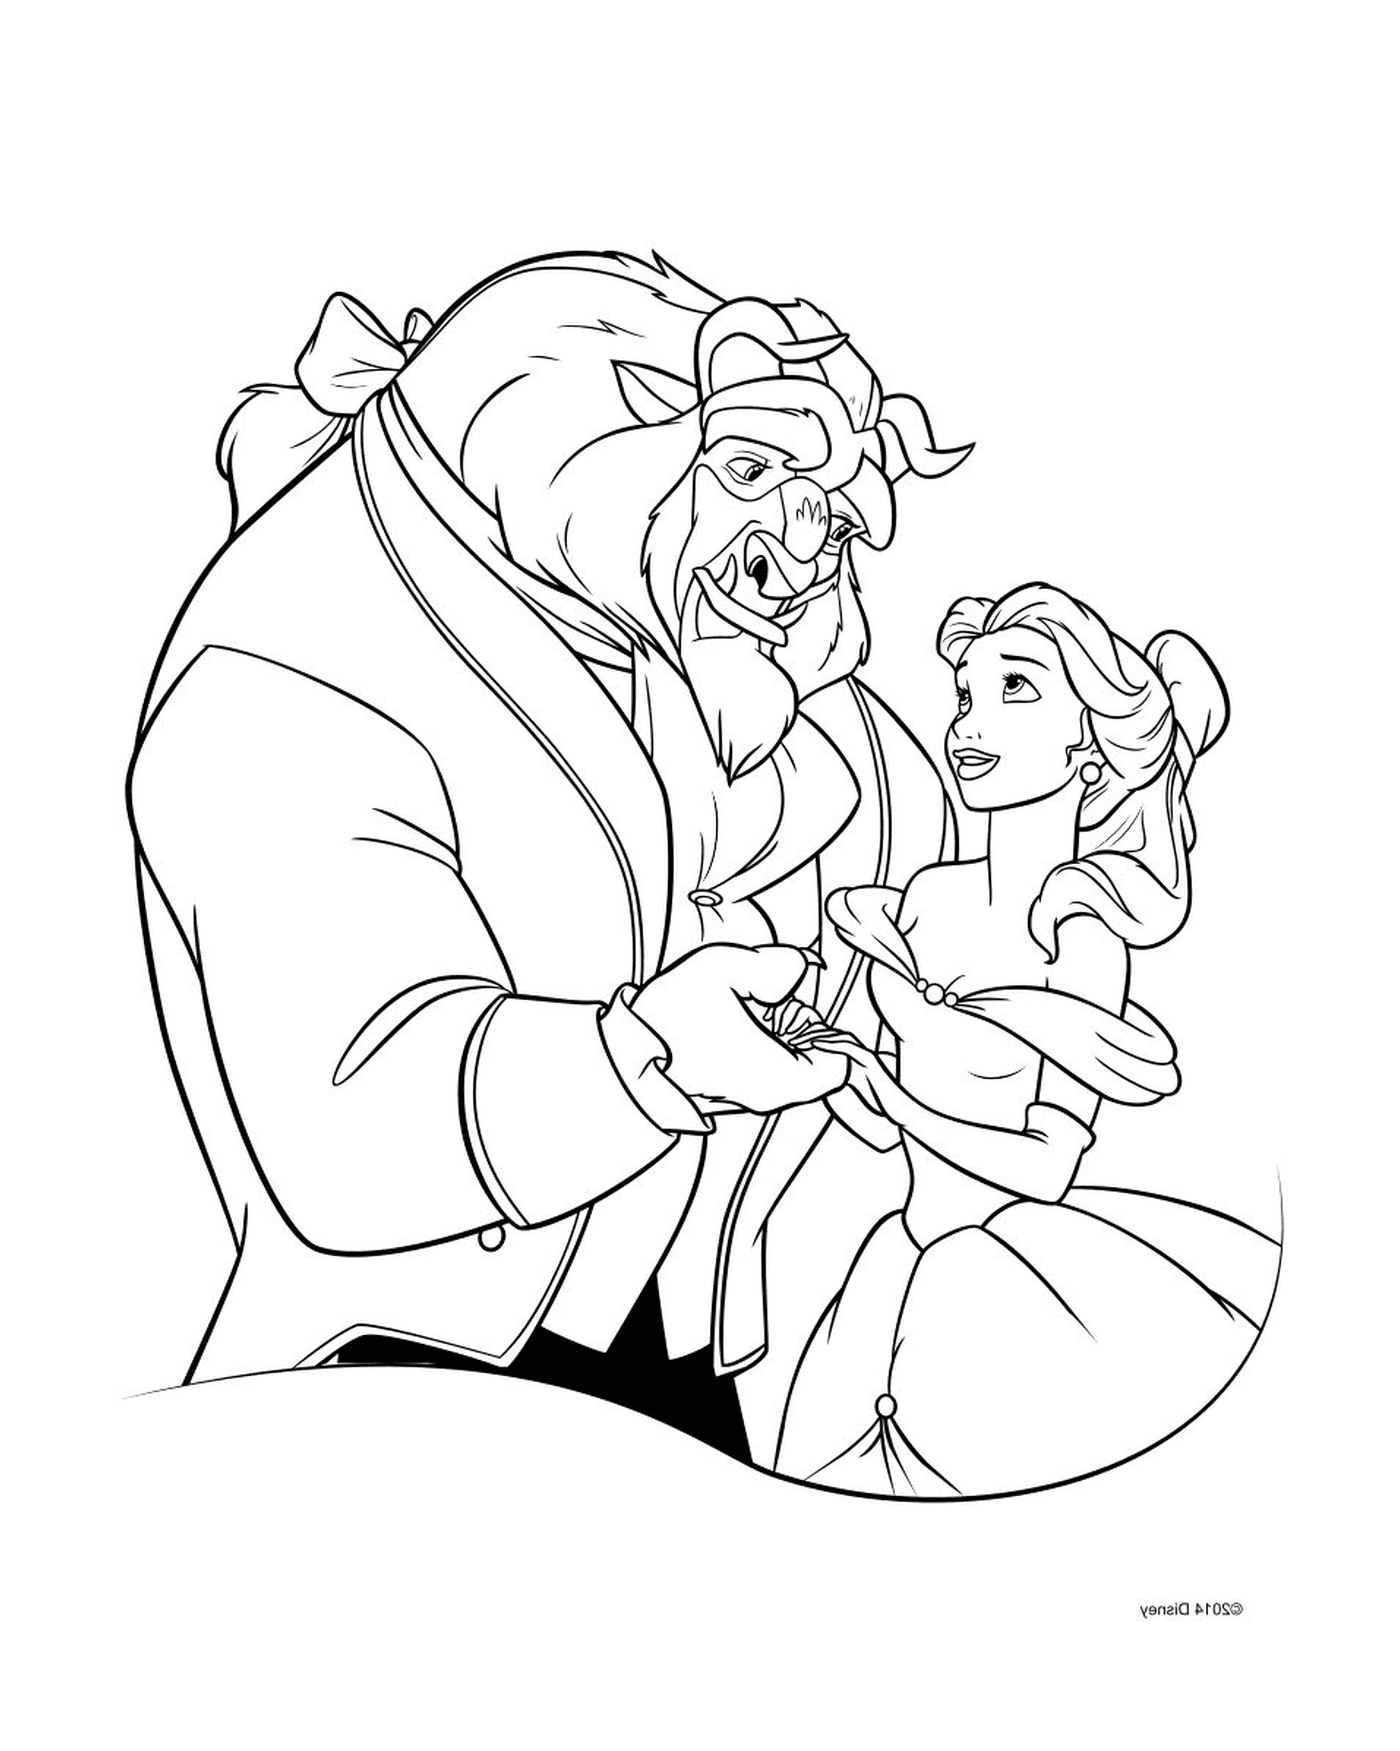  The Beauty and the Beast of Disney 